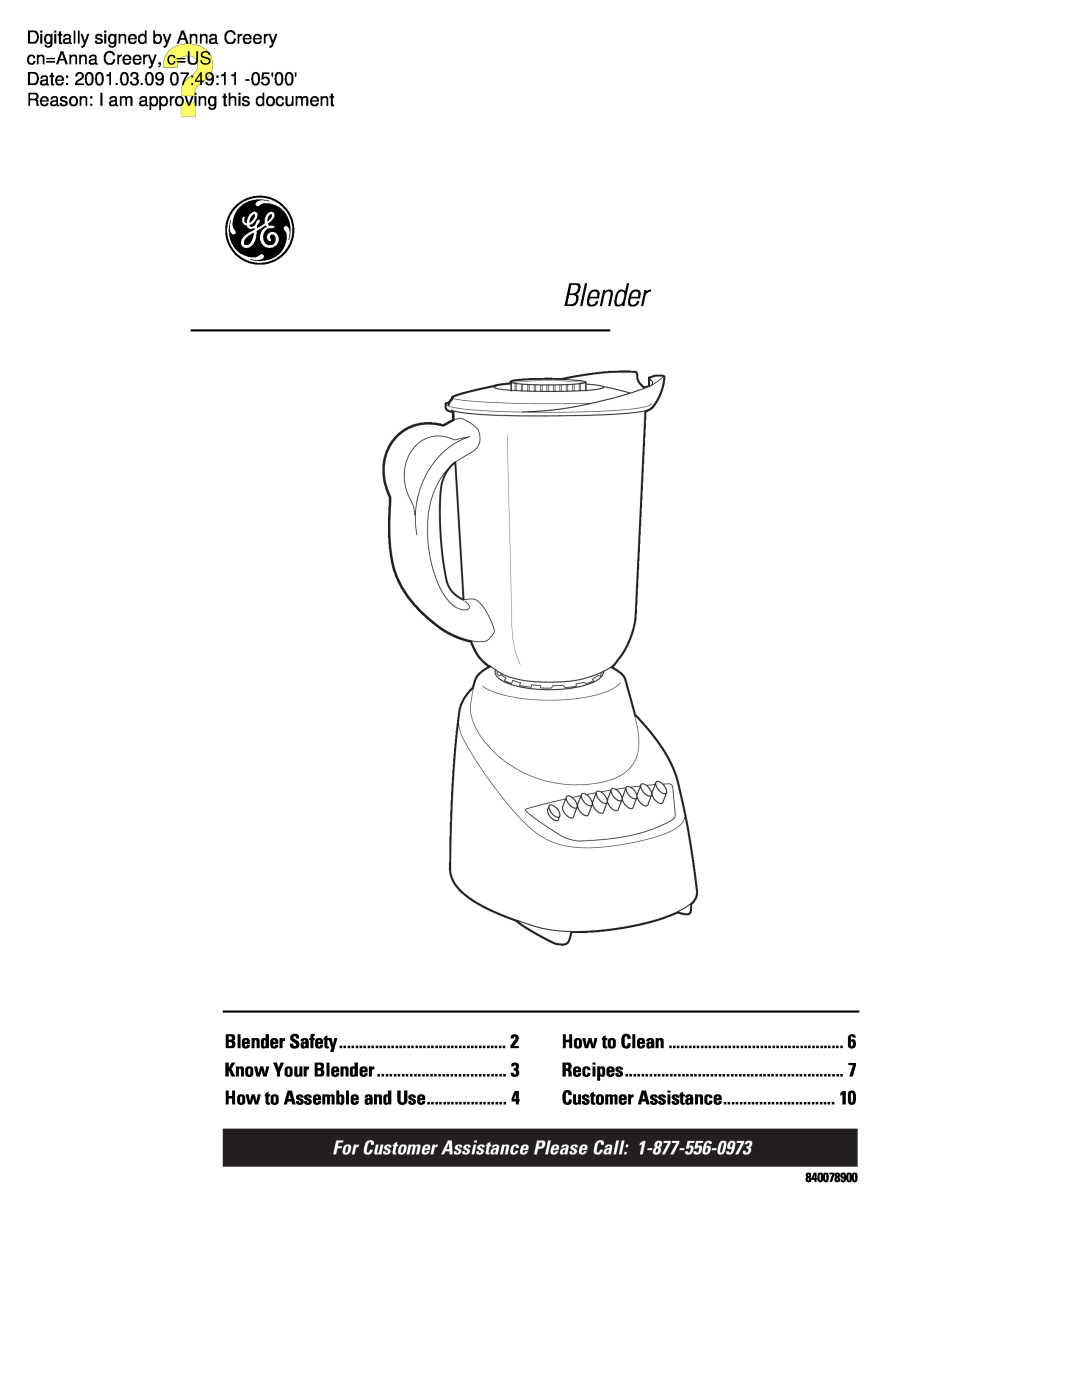 GE 840078900 manual Blender, For Customer Assistance Please Call, Digitally signed by Anna Creery cn=Anna Creery, c=US 